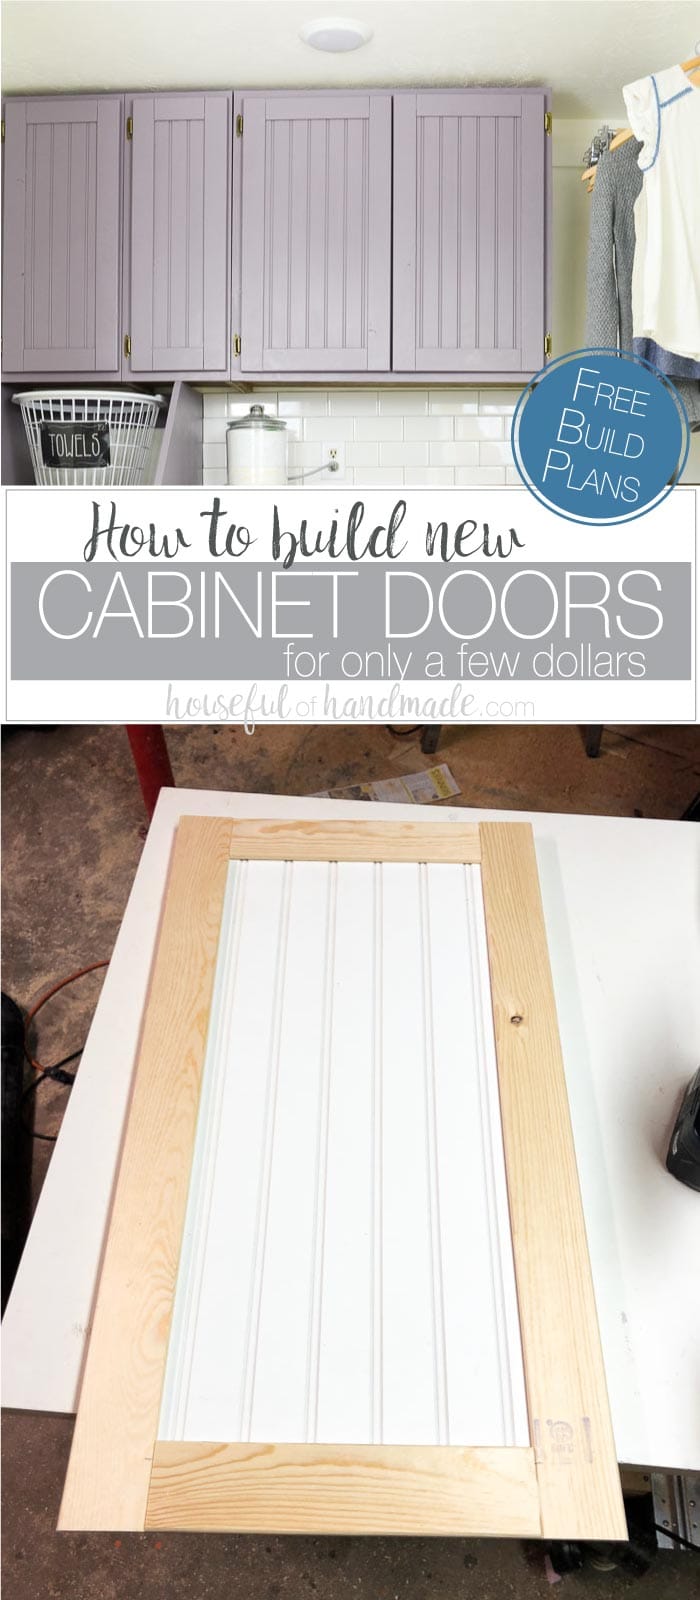 How to Build Cabinet Doors Cheap - Houseful of Handmade